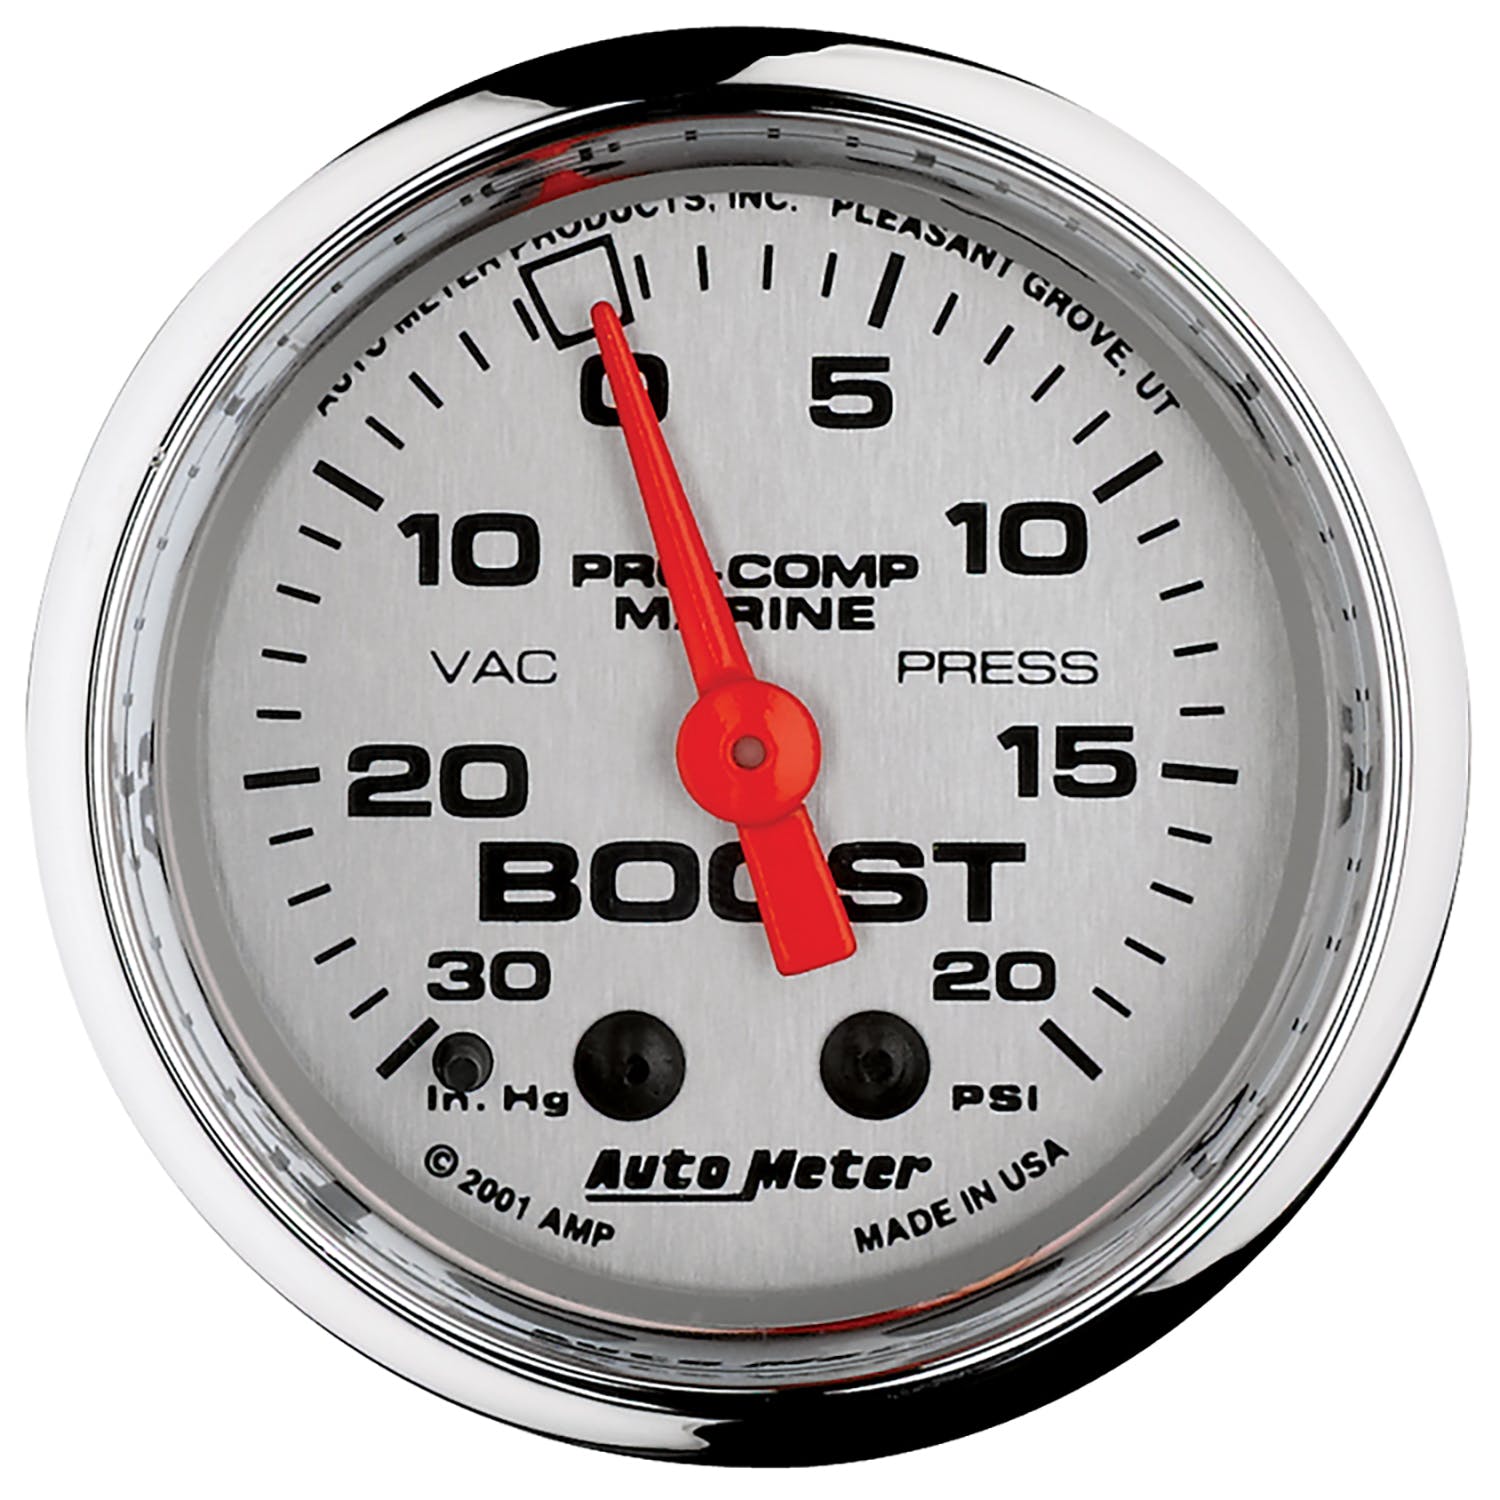 AutoMeter Products 200774-35 Vacuum/Boost Gauge, Mechanical-Marine Chrome 2 1/16, 30INHG-20PSI